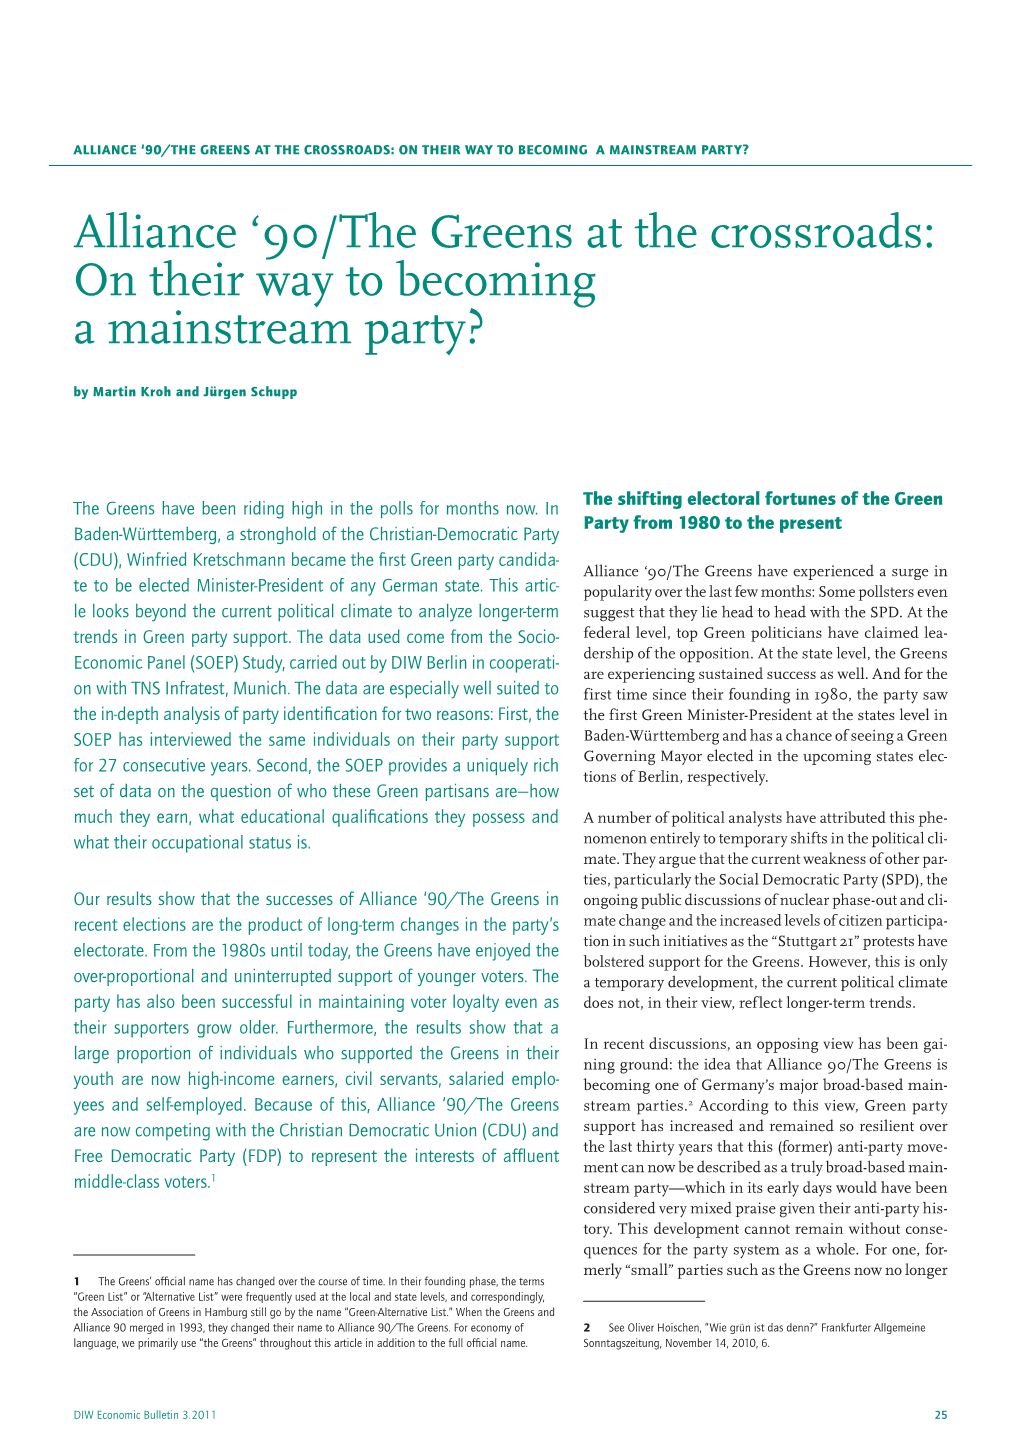 Alliance '90/The Greens at the Crossroads: on Their Way to Becoming a Mainstream Party?